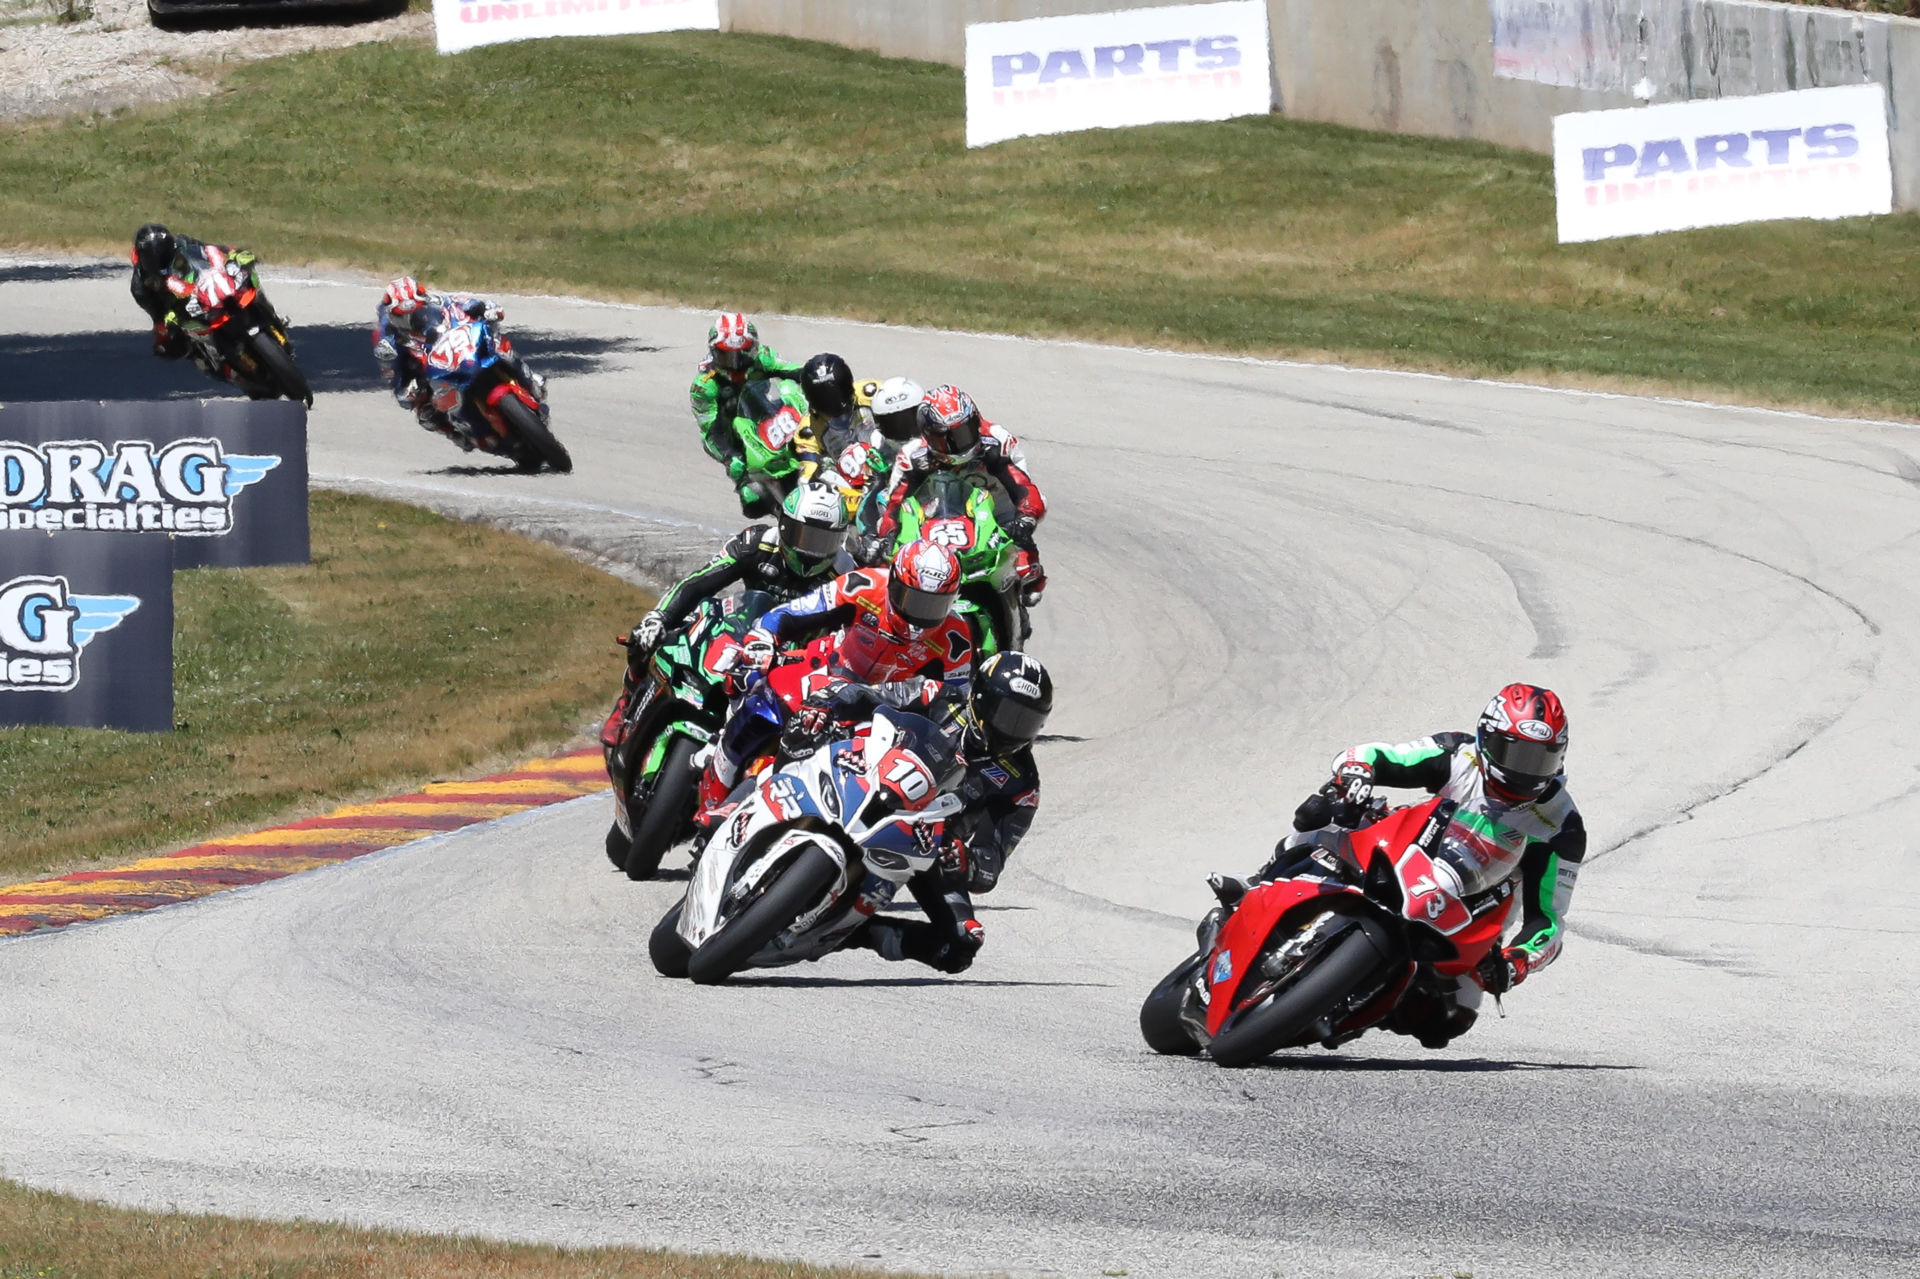 Long-time MotoAmerica partner Parts Unlimited has signed a new three-year agreement to continue as an official partner of the series. Photo by Brian J. Nelson, courtesy MotoAmerica.